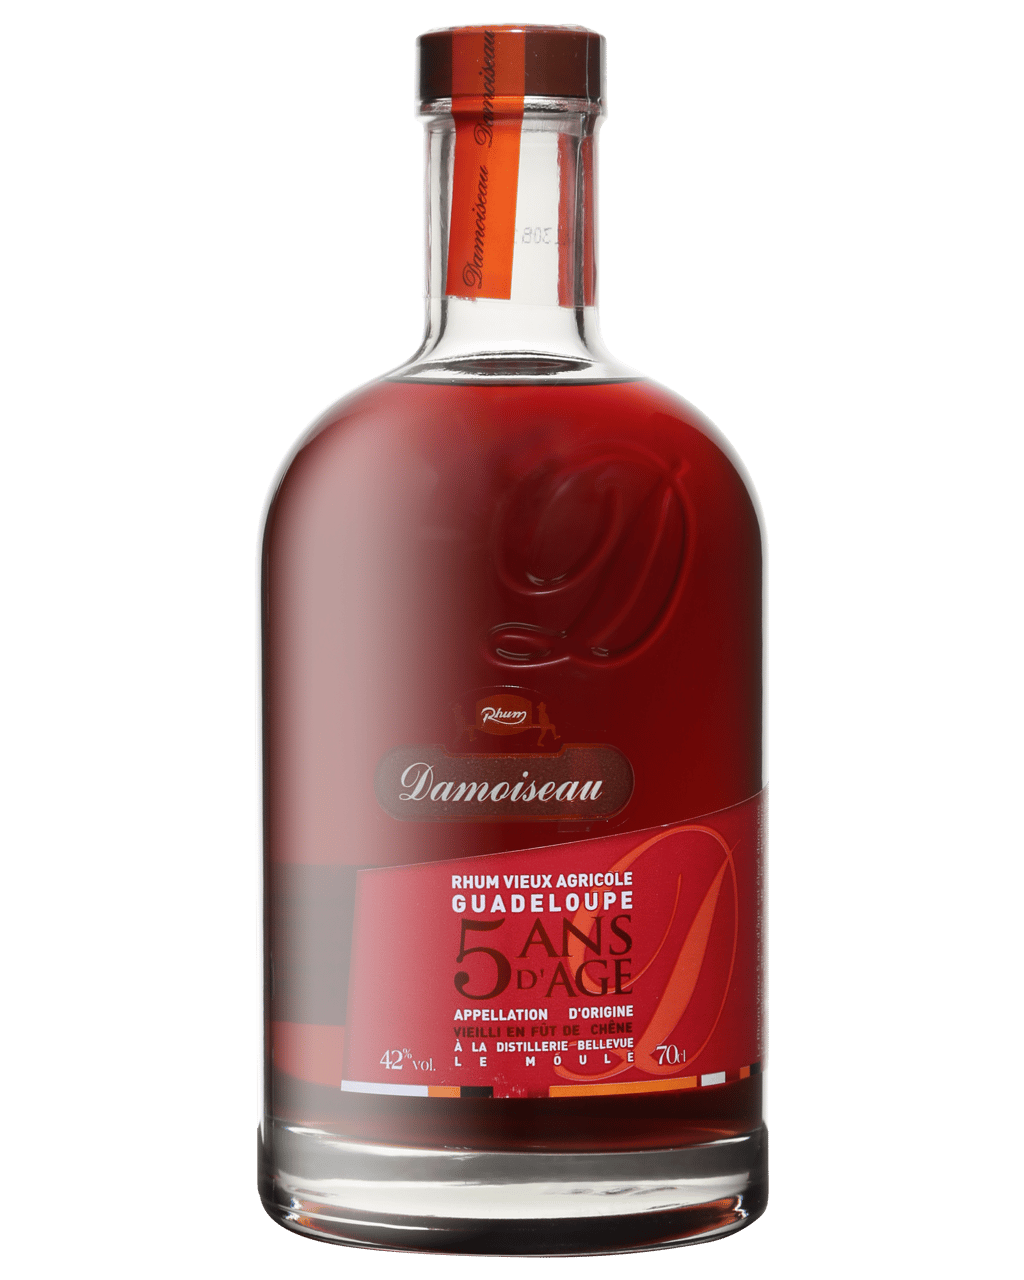 Damoiseau Vieux Rhum Agricole 5 Years Old Carafe & Gift Box 700ml  (Unbeatable Prices): Buy Online @Best Deals with Delivery - Dan Murphy's